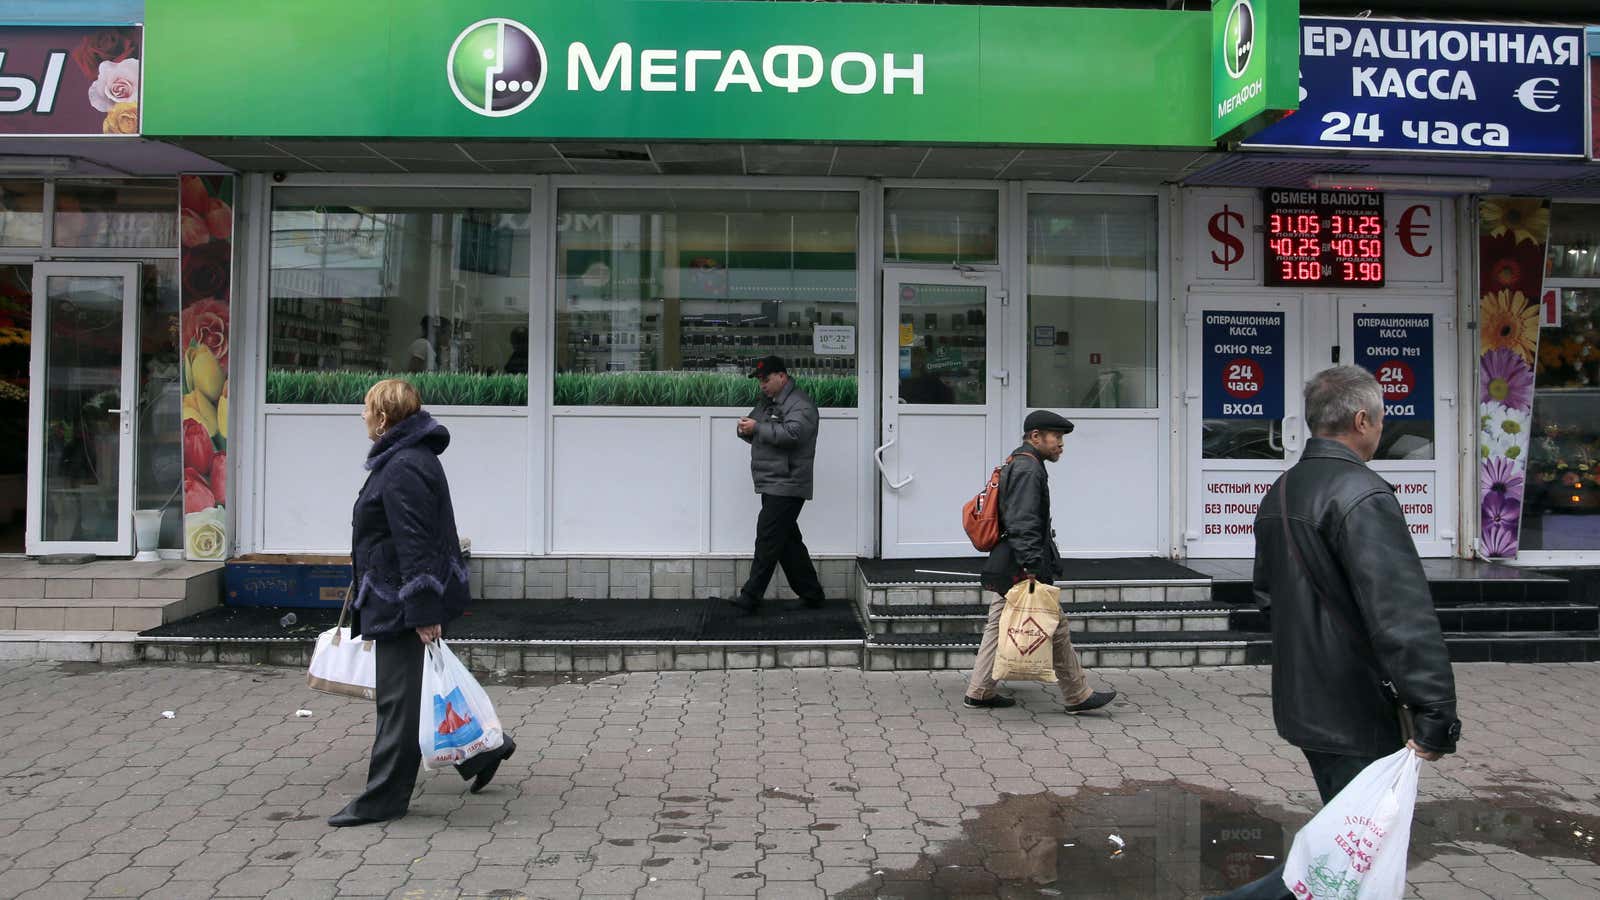 With more than 60 million subscribers, MegaFon looks to raise around $2 billion in a simultaneous IPO in London and Moscow markets.